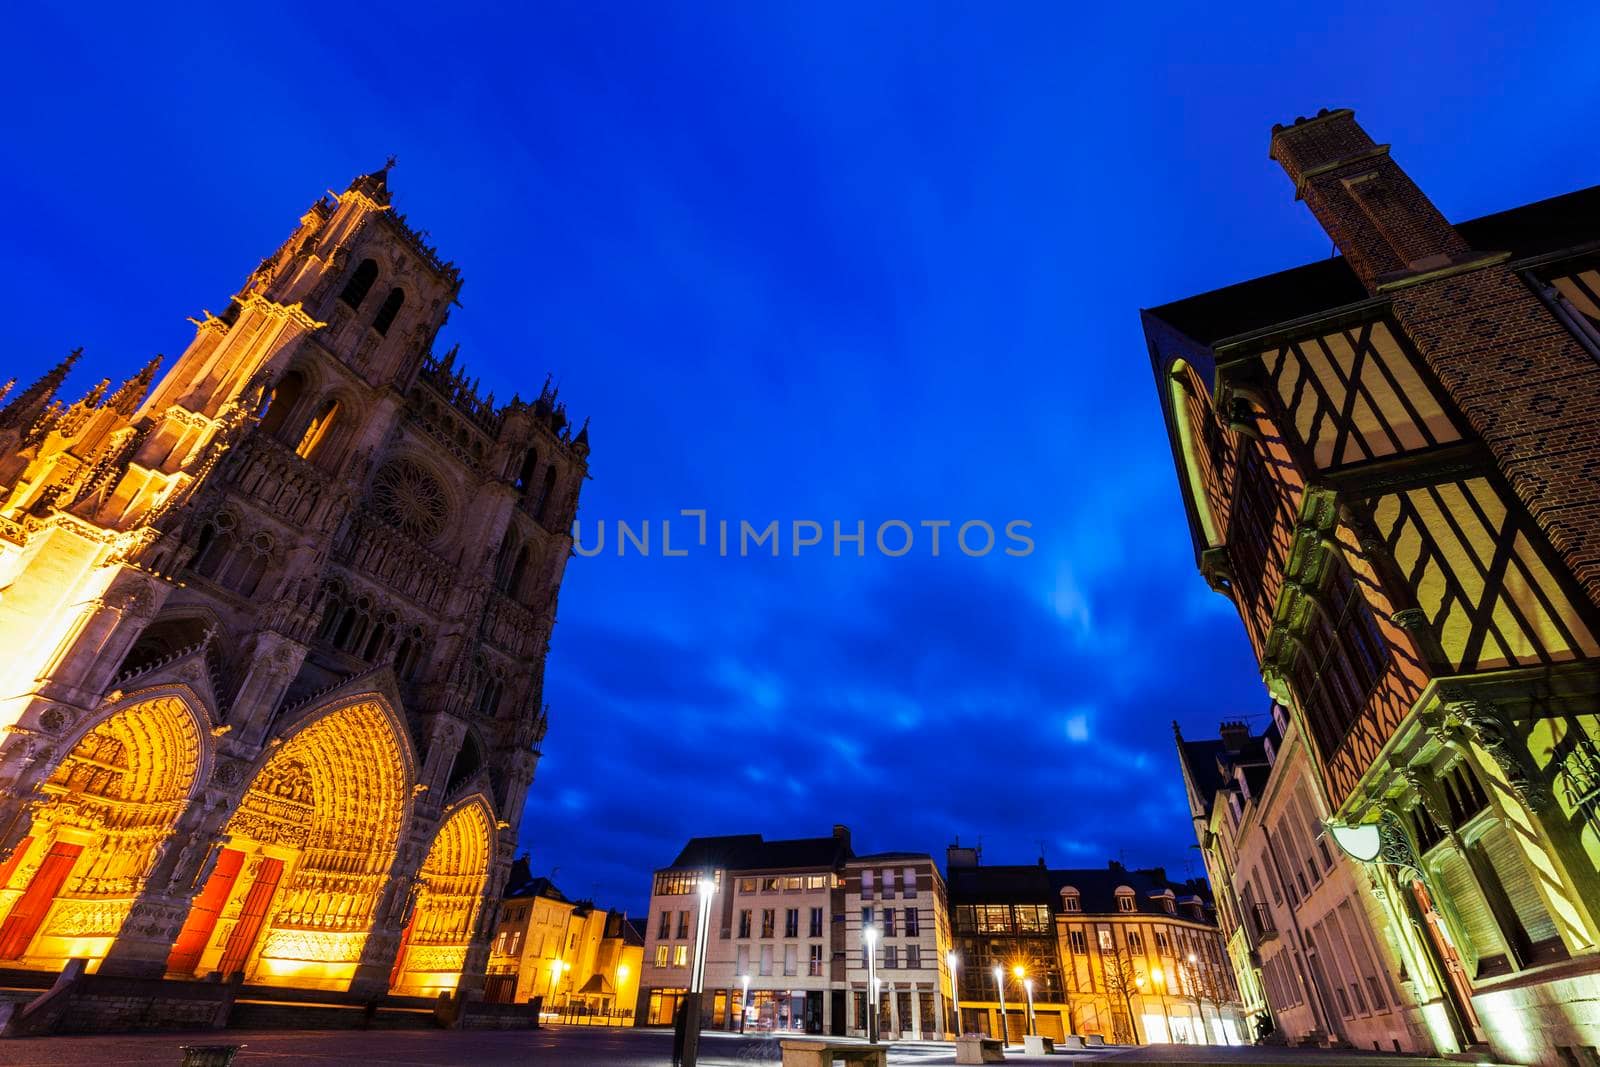 Place Notre-Dame in Amiens by benkrut